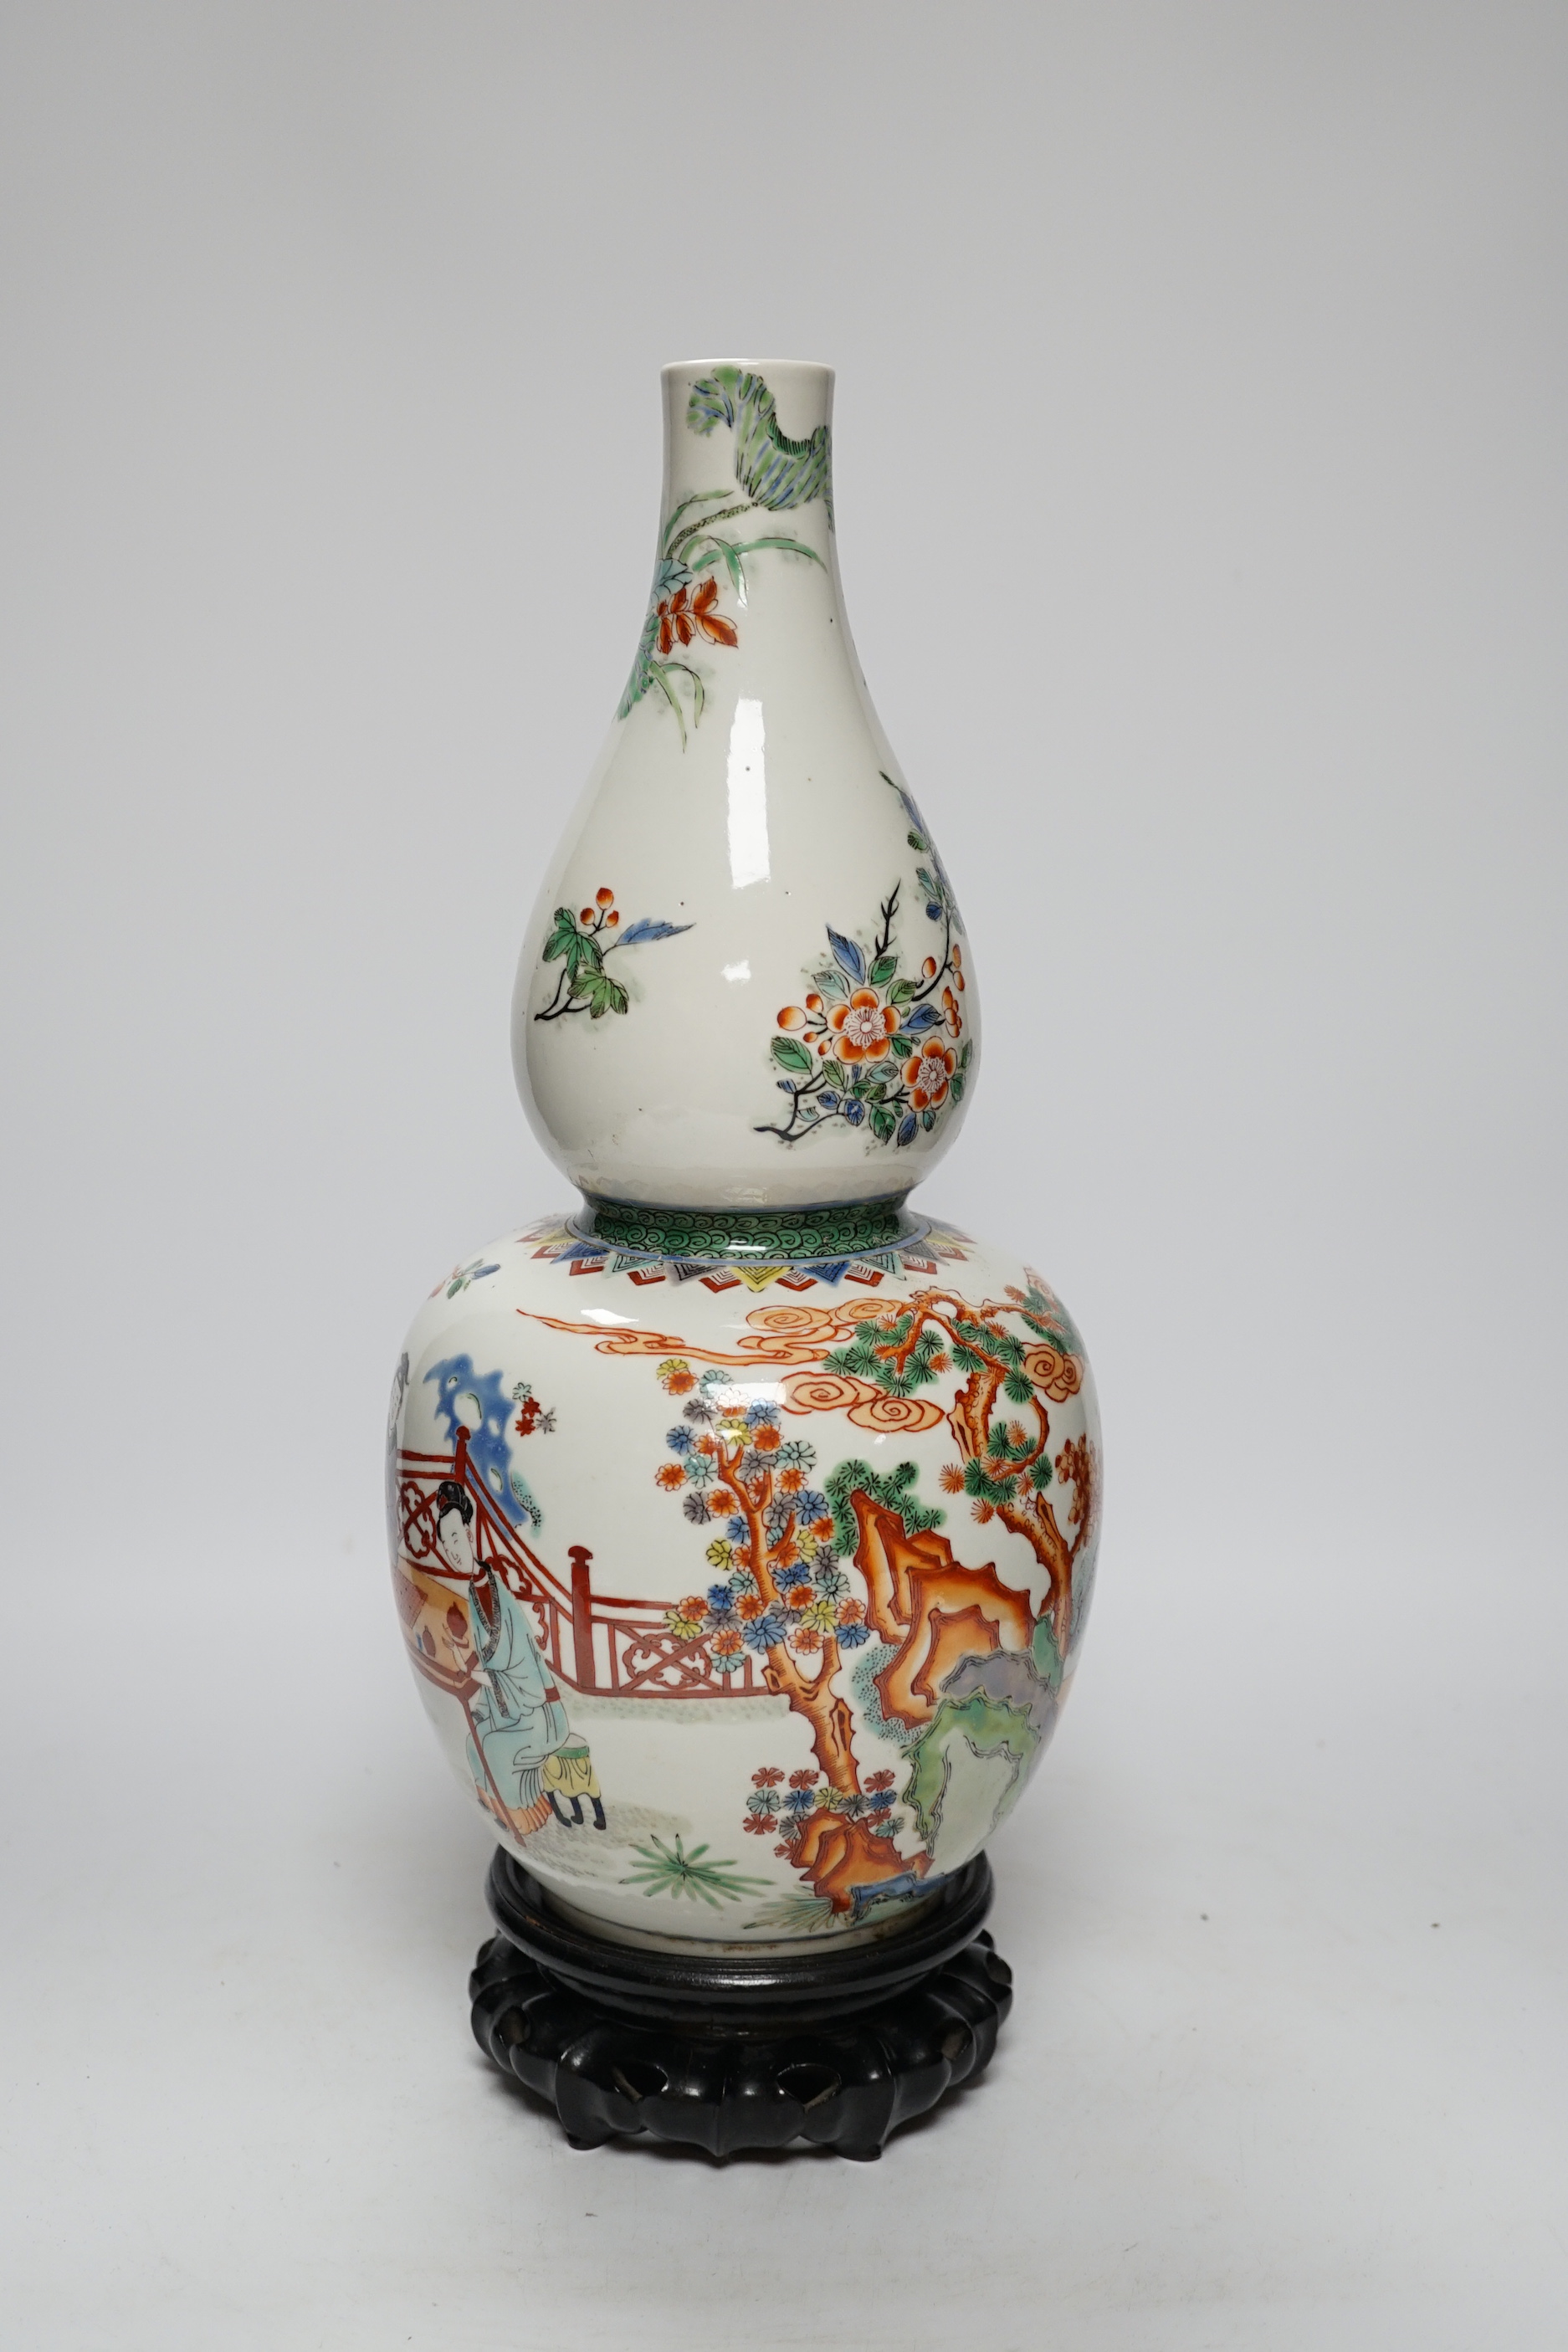 A Chinese enamelled porcelain double-gourd vase on hardwood stand, 41cm total height